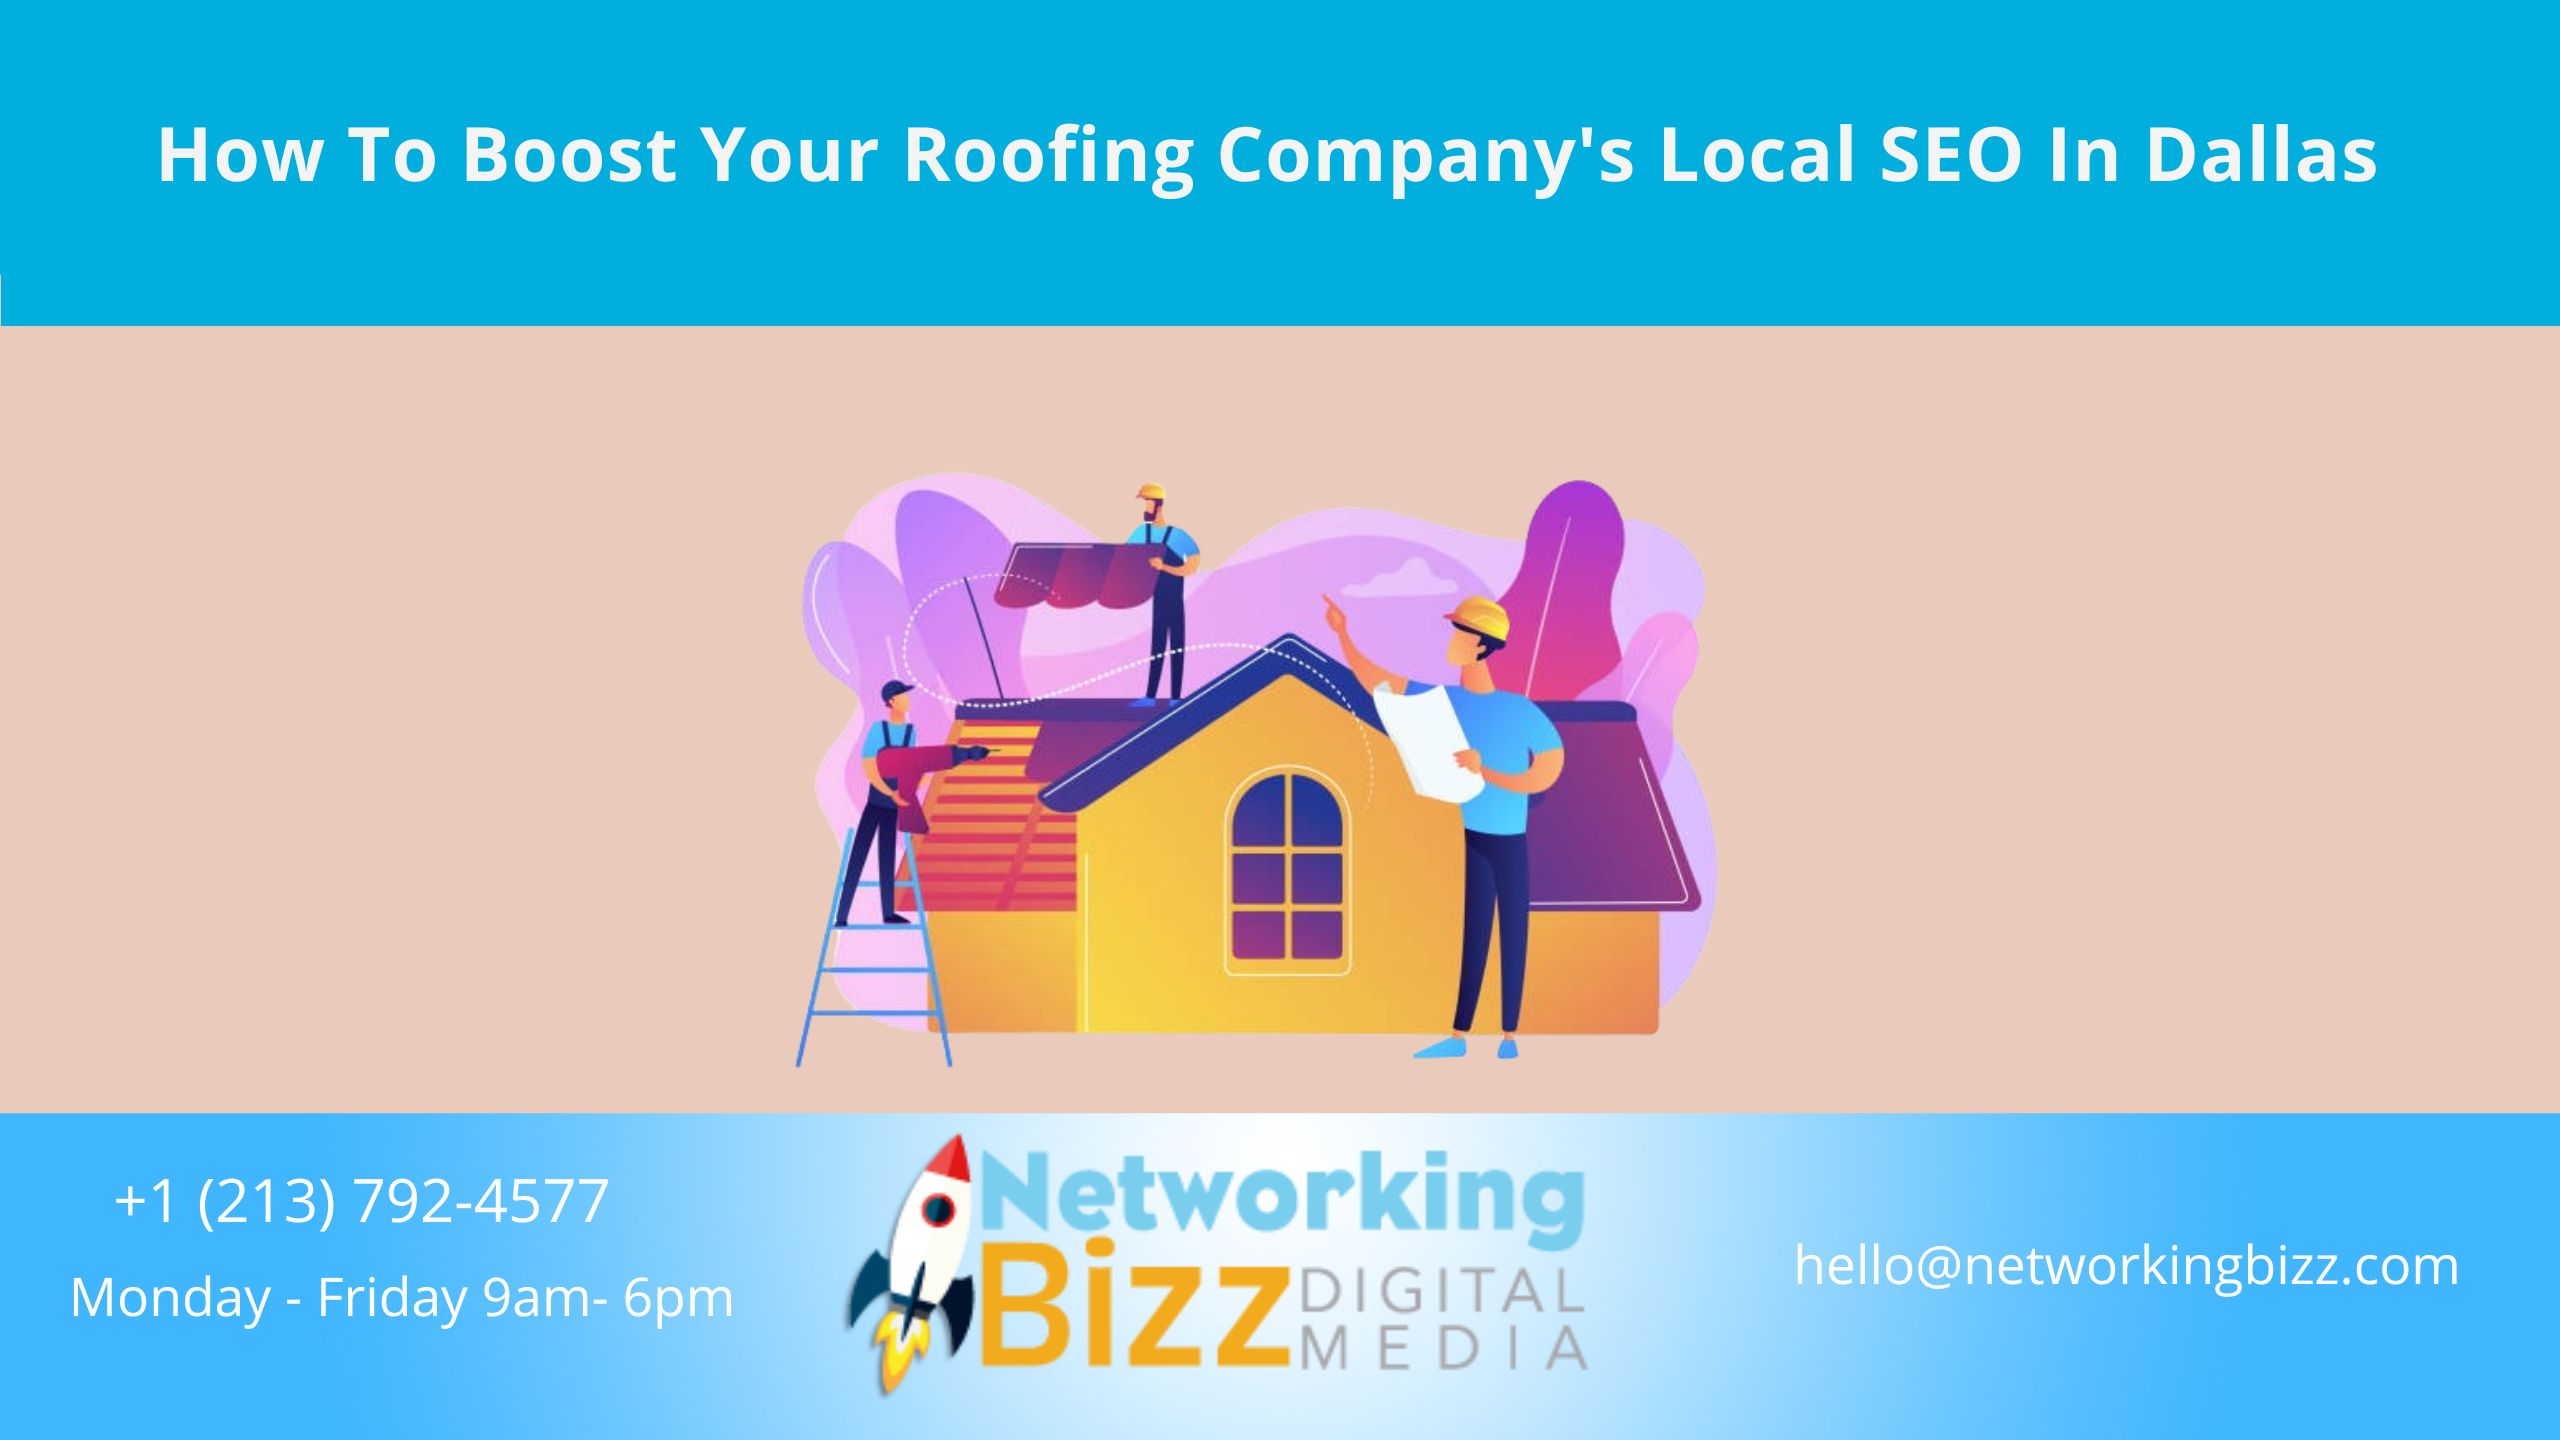 How To Boost Your Roofing Company’s Local SEO In Dallas